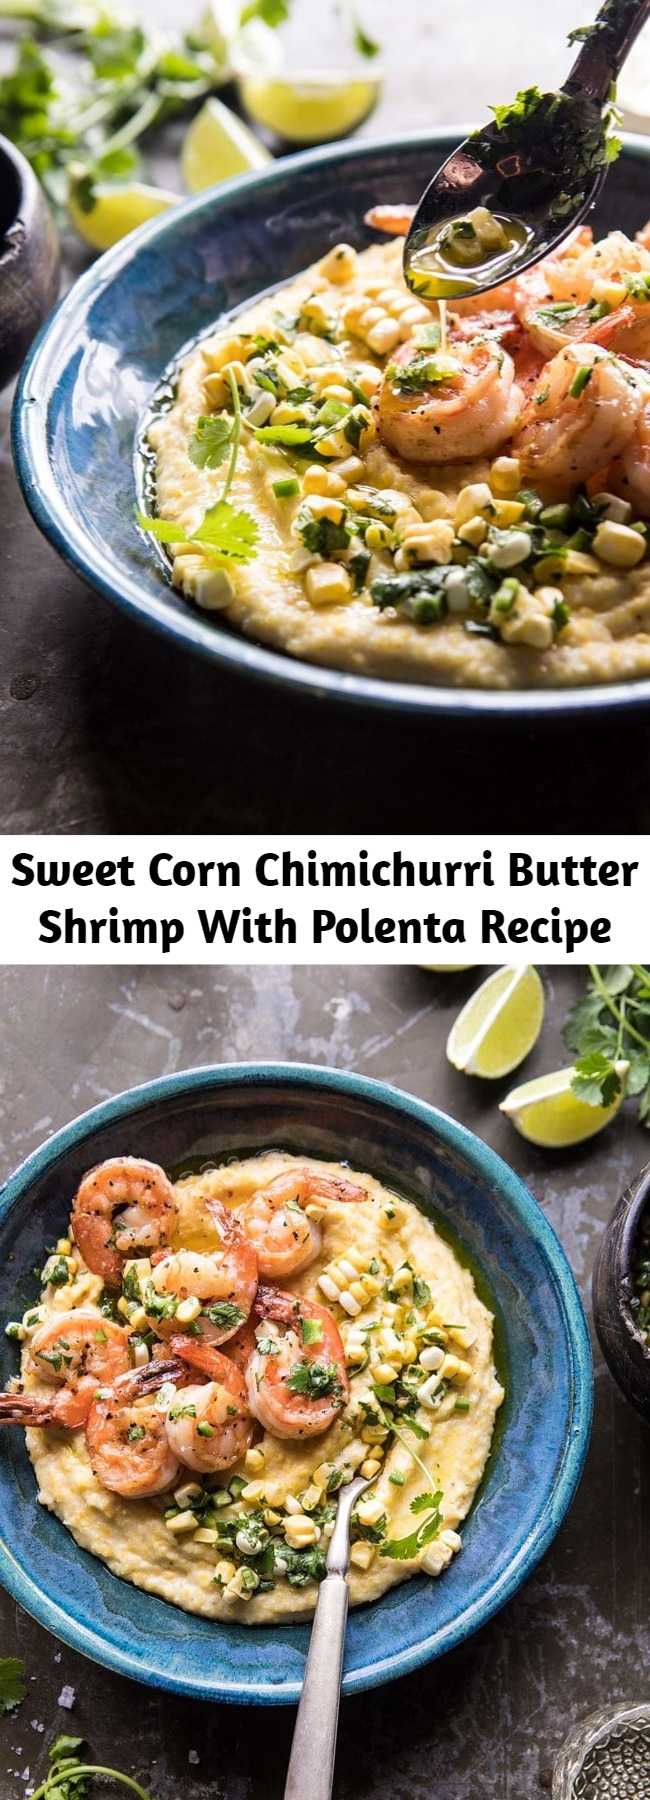 This chimichurri butter shrimp is tossed with a sweet corn chimichurri sauce and served over a bed of creamy polenta. It's a quick, simple, healthy, and delicious 30 minute dinner that anyone who enjoys shrimp will love. Great for busy nights when you only have a few minutes to get dinner on the table.